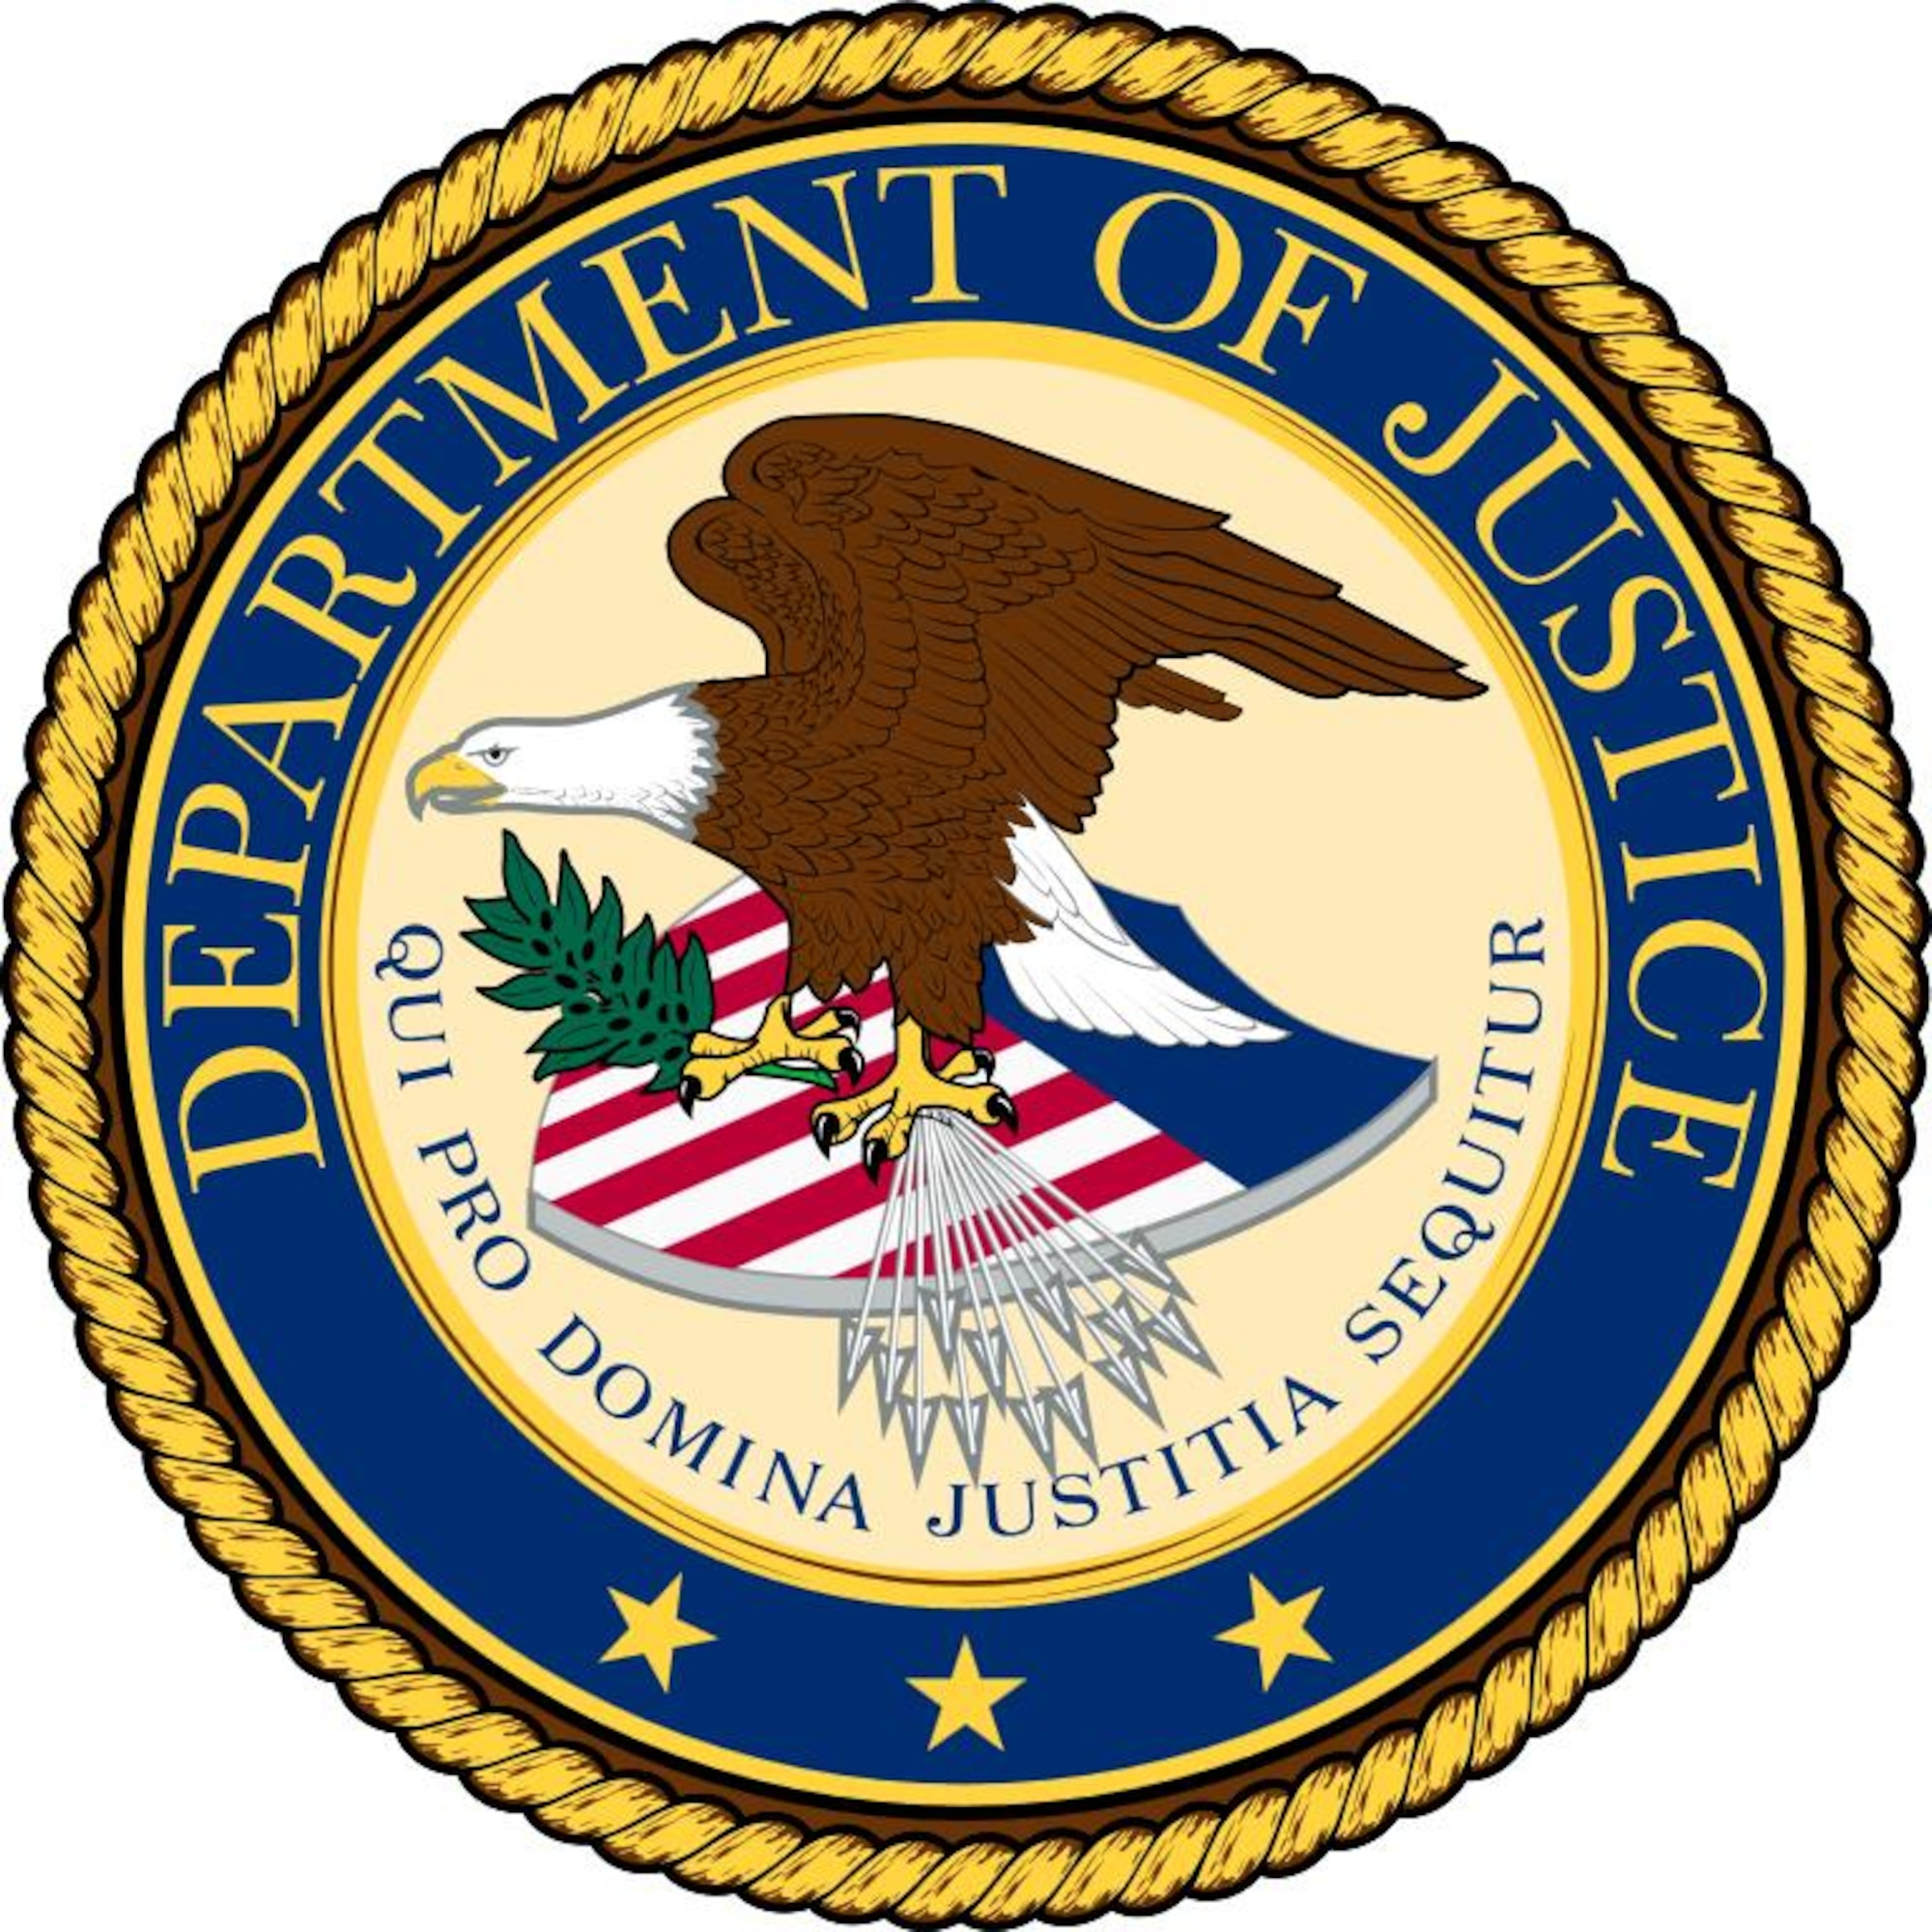 Five men were charged in a 71-count indictment with engaging in conspiracies to defraud several federal agencies by paying bribes and fraudulently obtaining at least $15 million in government contracts they were not entitled to through disabled-veteran set asides and other programs. (Department of Justice graphic)